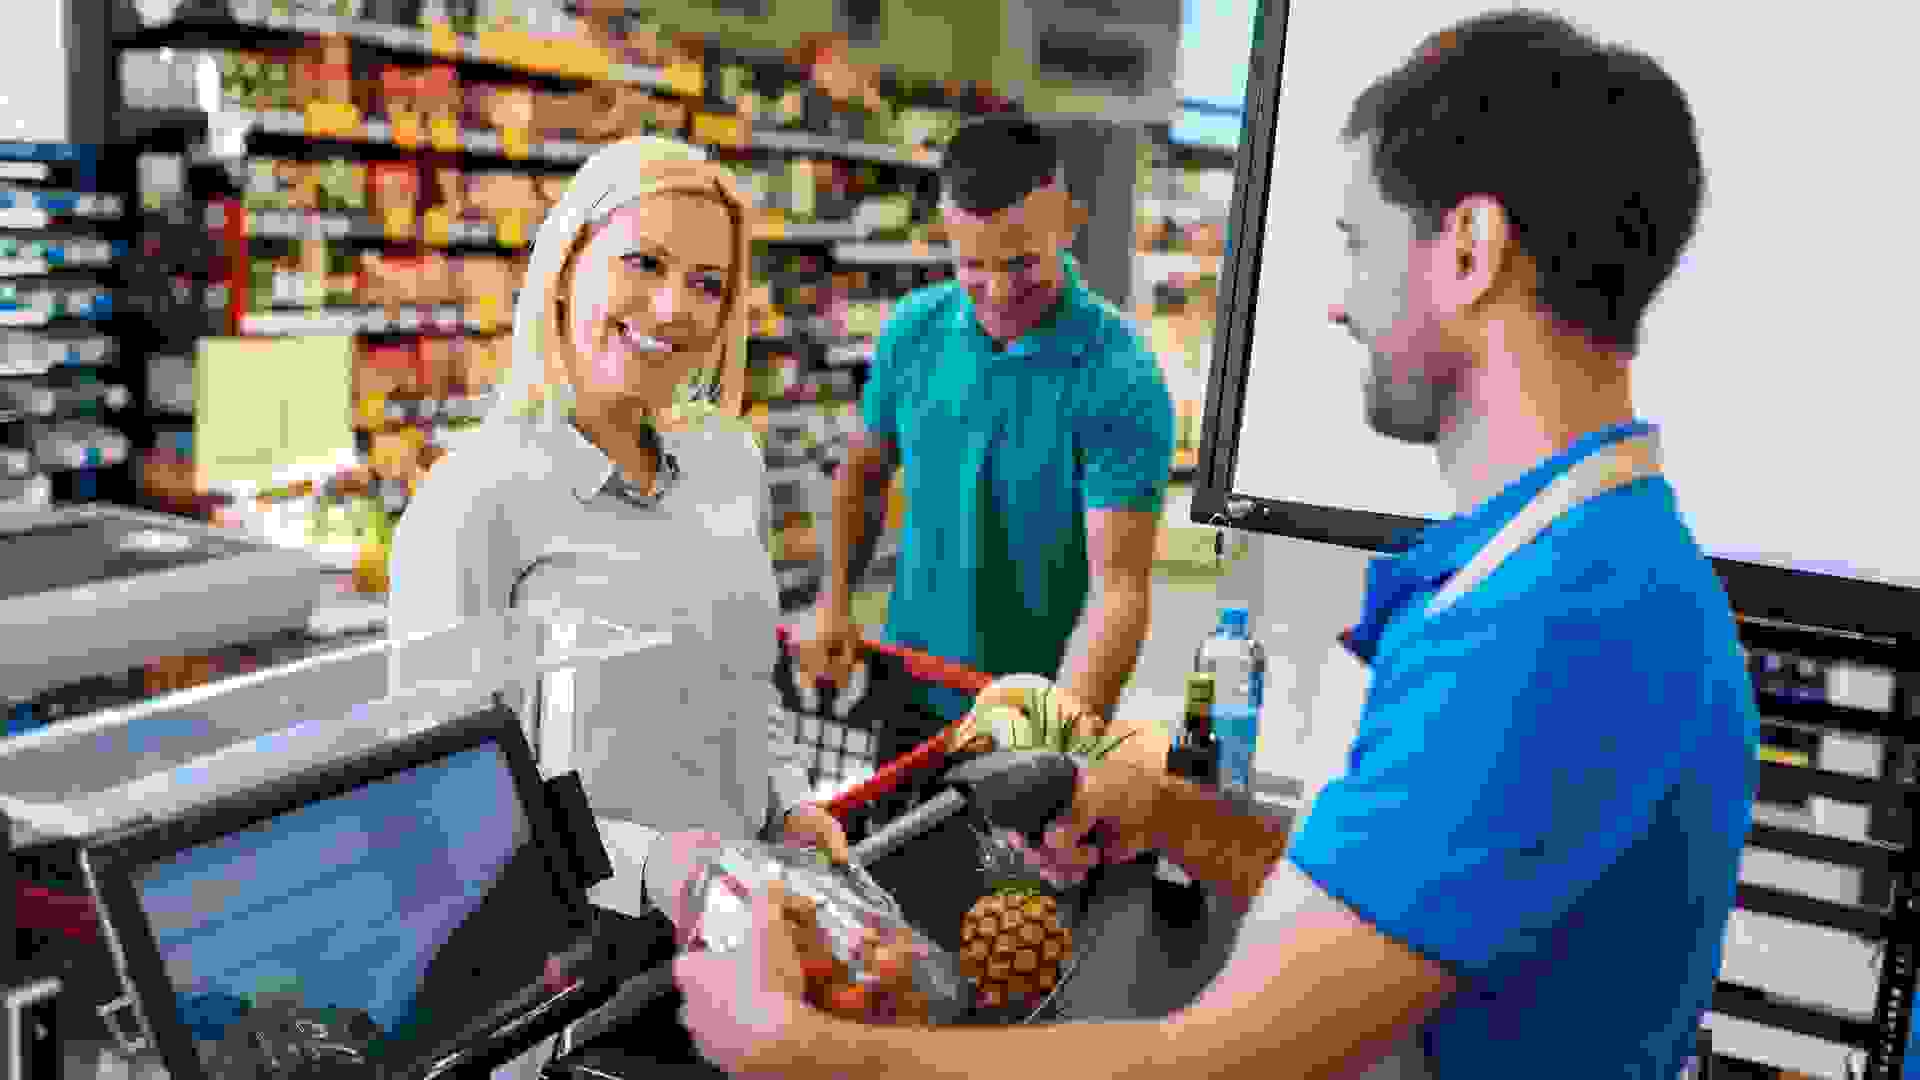 Family buying groceries in supermarket and making decisions what to buy stock photo